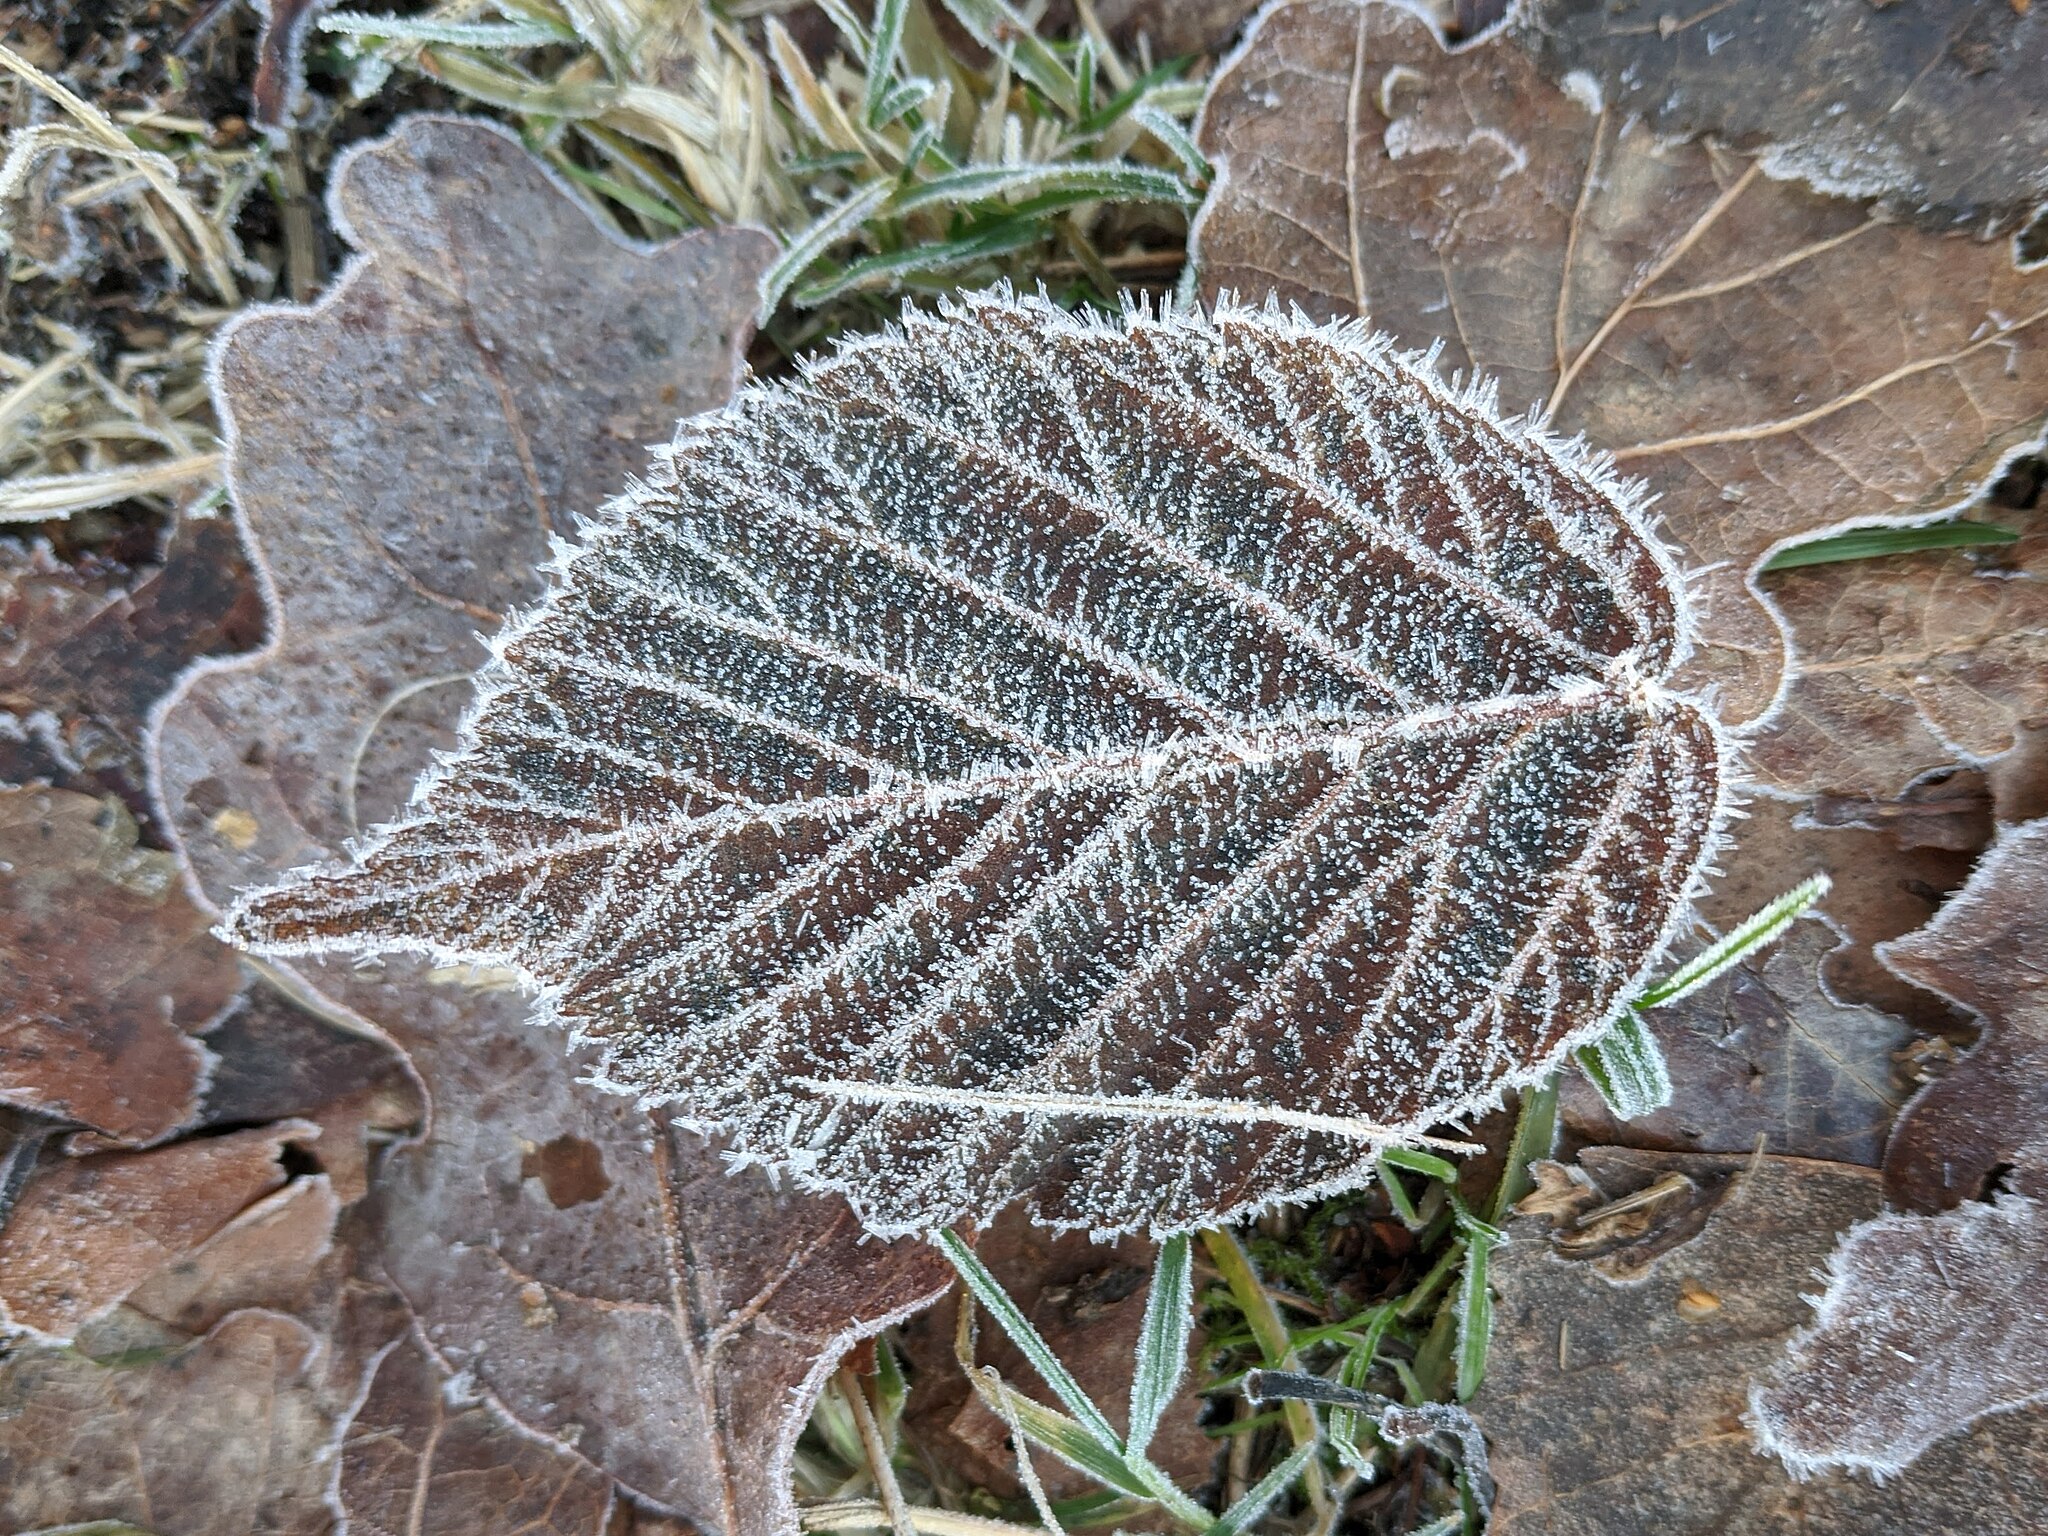 A single frosted leaf with clear contours and veins.